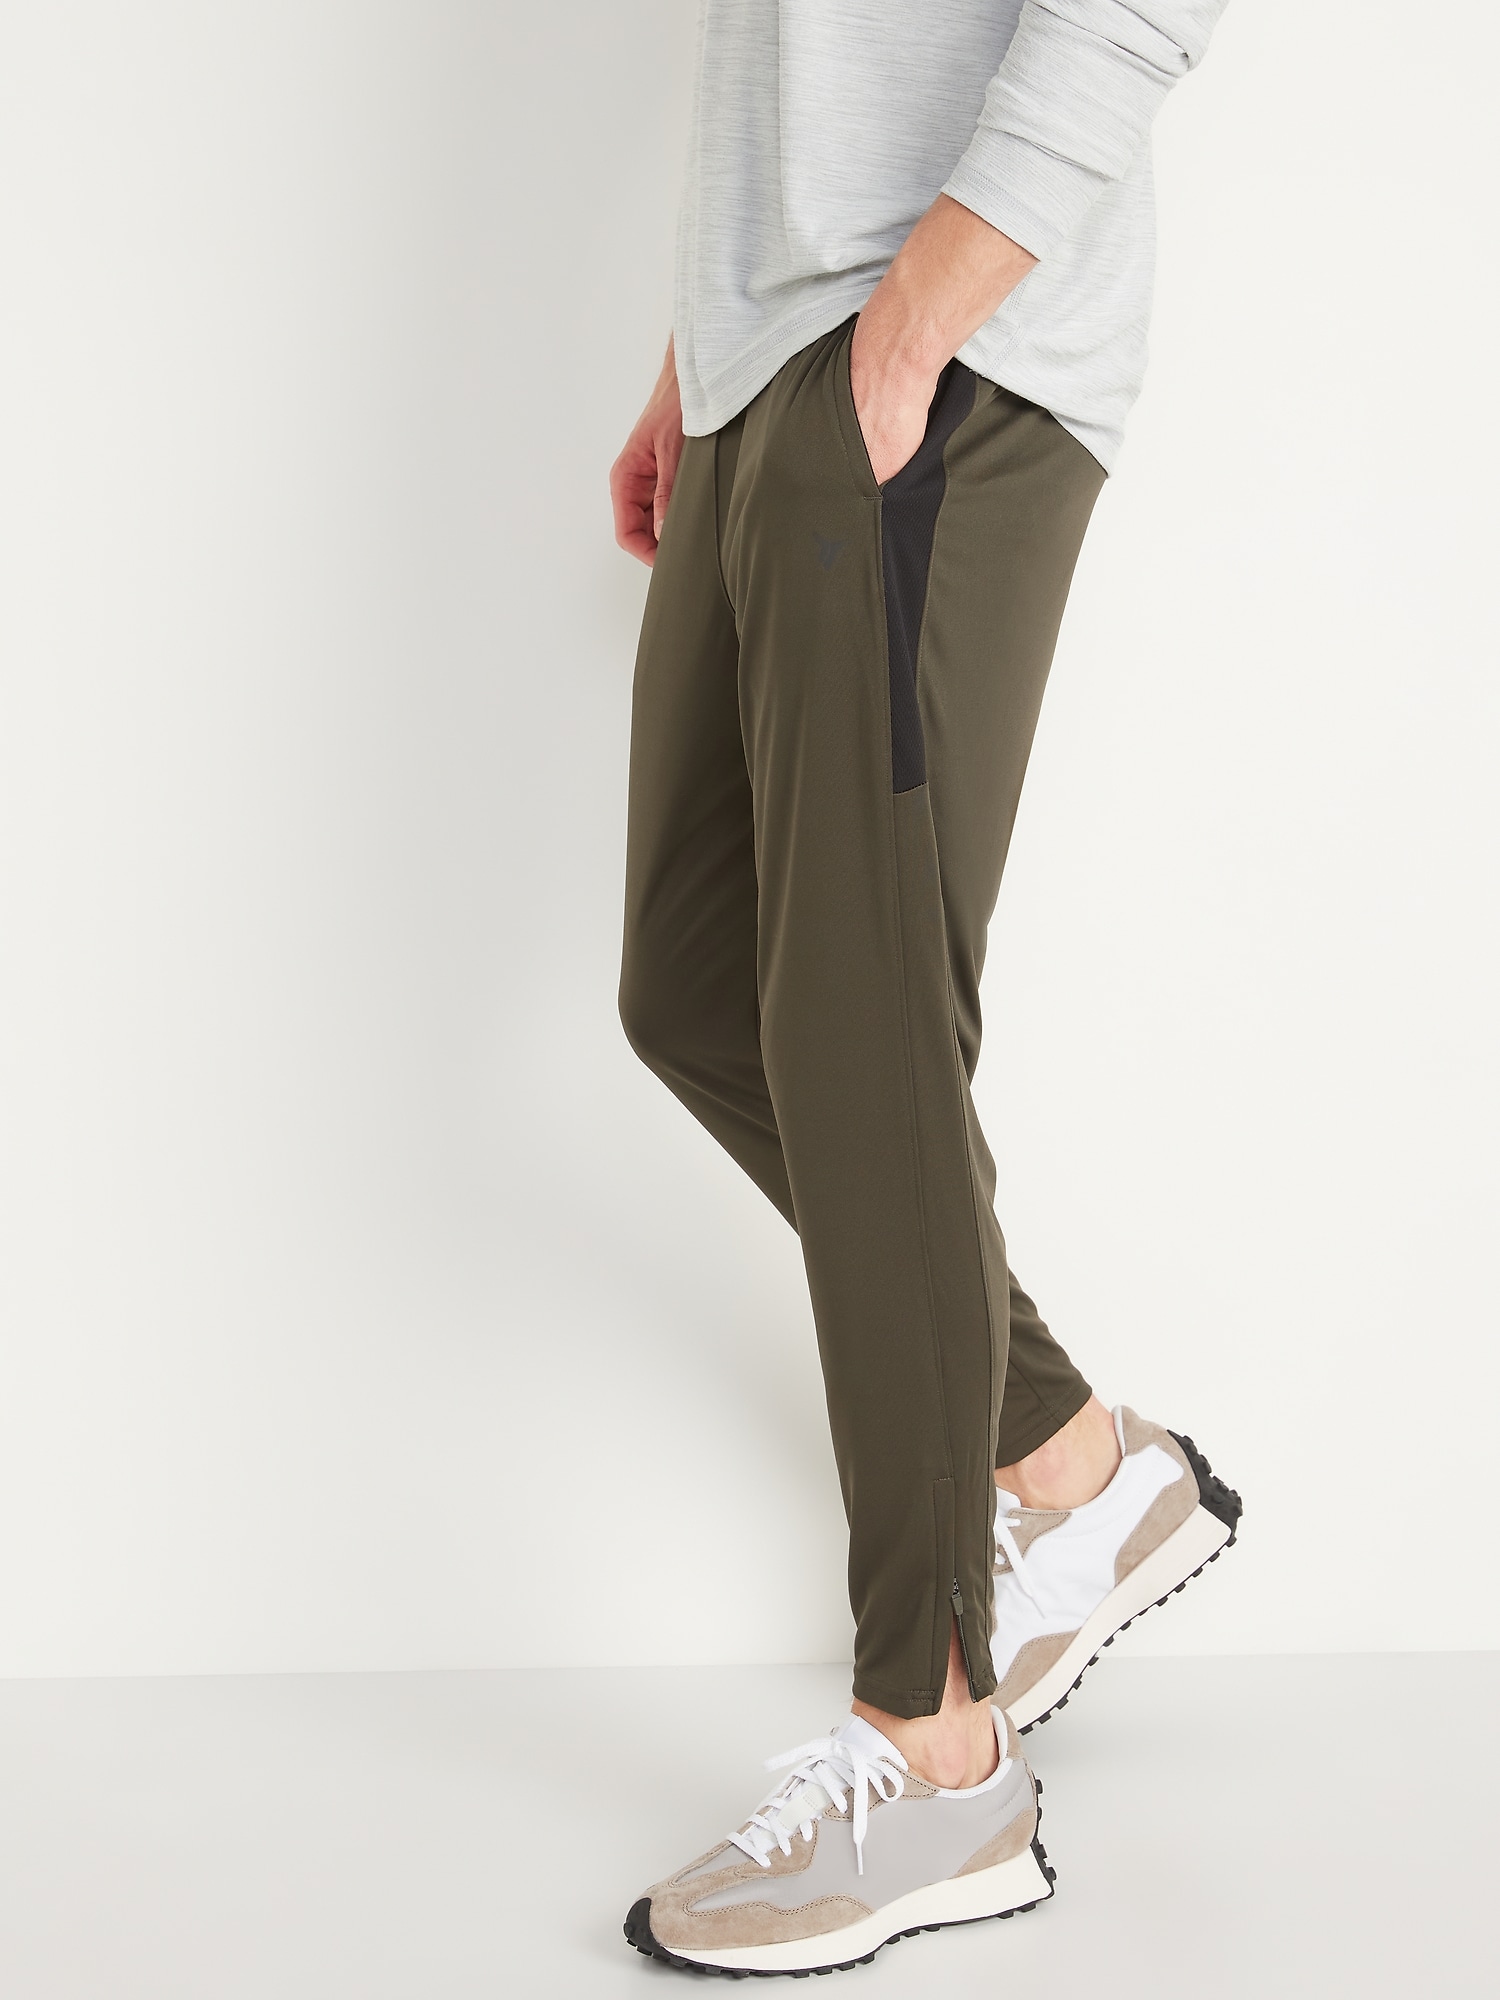 Retro Mens Ankle Track Pants With Zipper And Button, Straight Pockets,  Oversized And Casual Streetwear Loose Brown Corduroy Trousers From Fbbm,  $35.74 | DHgate.Com